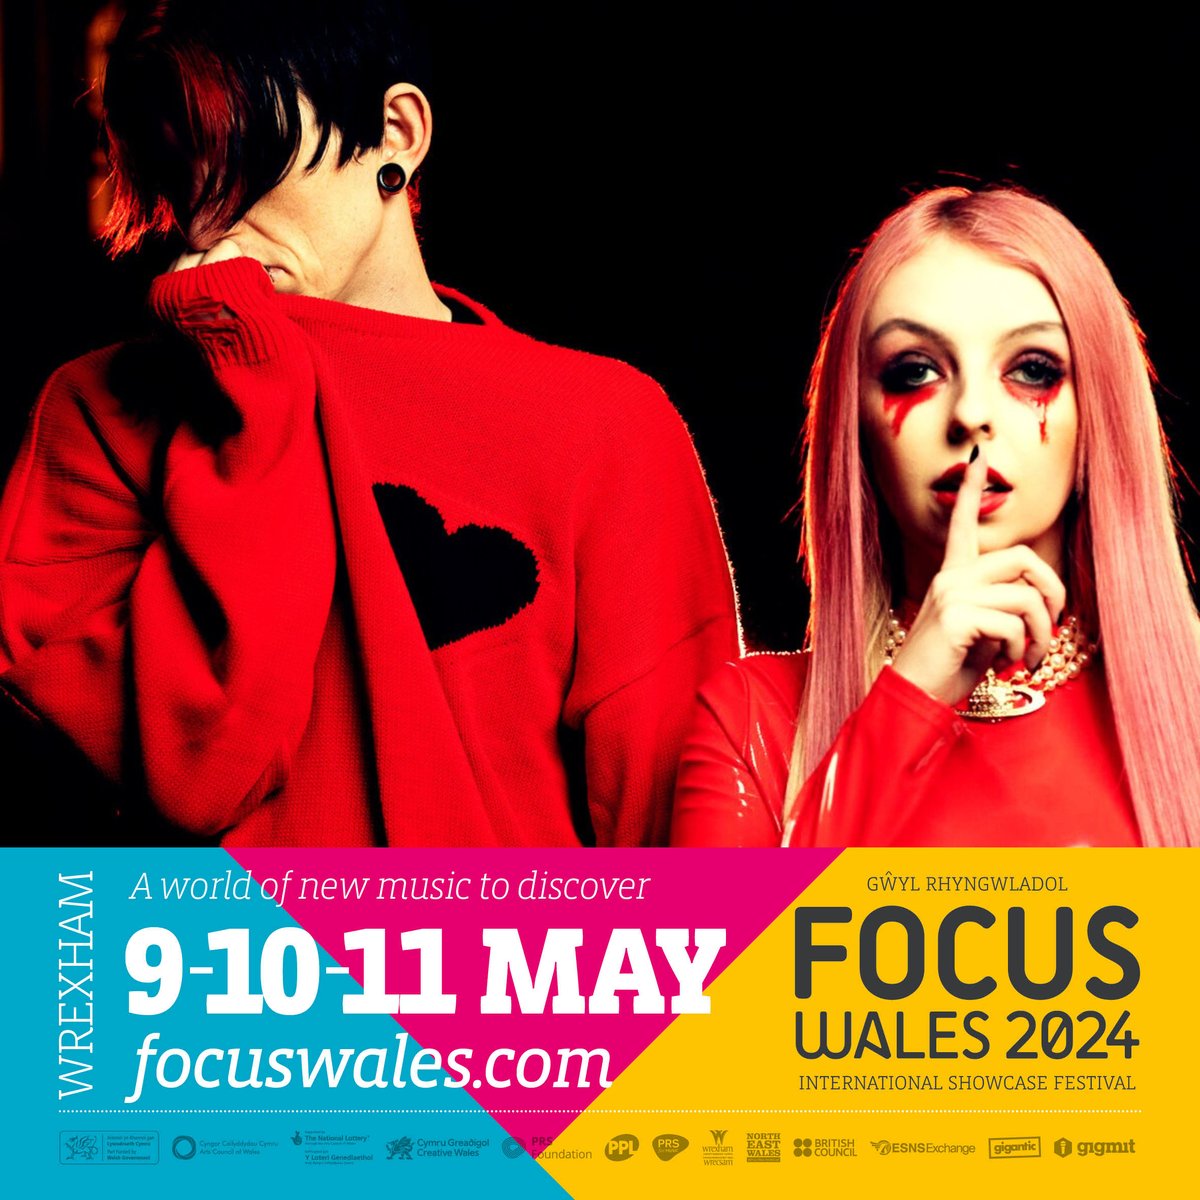 🏴󠁧󠁢󠁷󠁬󠁳󠁿 🖤 @FocusWales 🖤🏴󠁧󠁢󠁷󠁬󠁳󠁿 🏴󠁧󠁢󠁷󠁬󠁳󠁿 🖤 W R E C S Λ M | W R E X H Λ M 🖤🏴󠁧󠁢󠁷󠁬󠁳󠁿 📅 11.05.2024 📌 @PennyBlackWXM ⏰ 8.30PM 🖤 HOPE TO SEE YOU THERE! 🖤 🖤 GOBEITHIO GWELD CHI YNΛ! 🖤 ➡️ TICEDI ➡️ TICKETS ➡️ focuswales.com #FOCUSWales2024